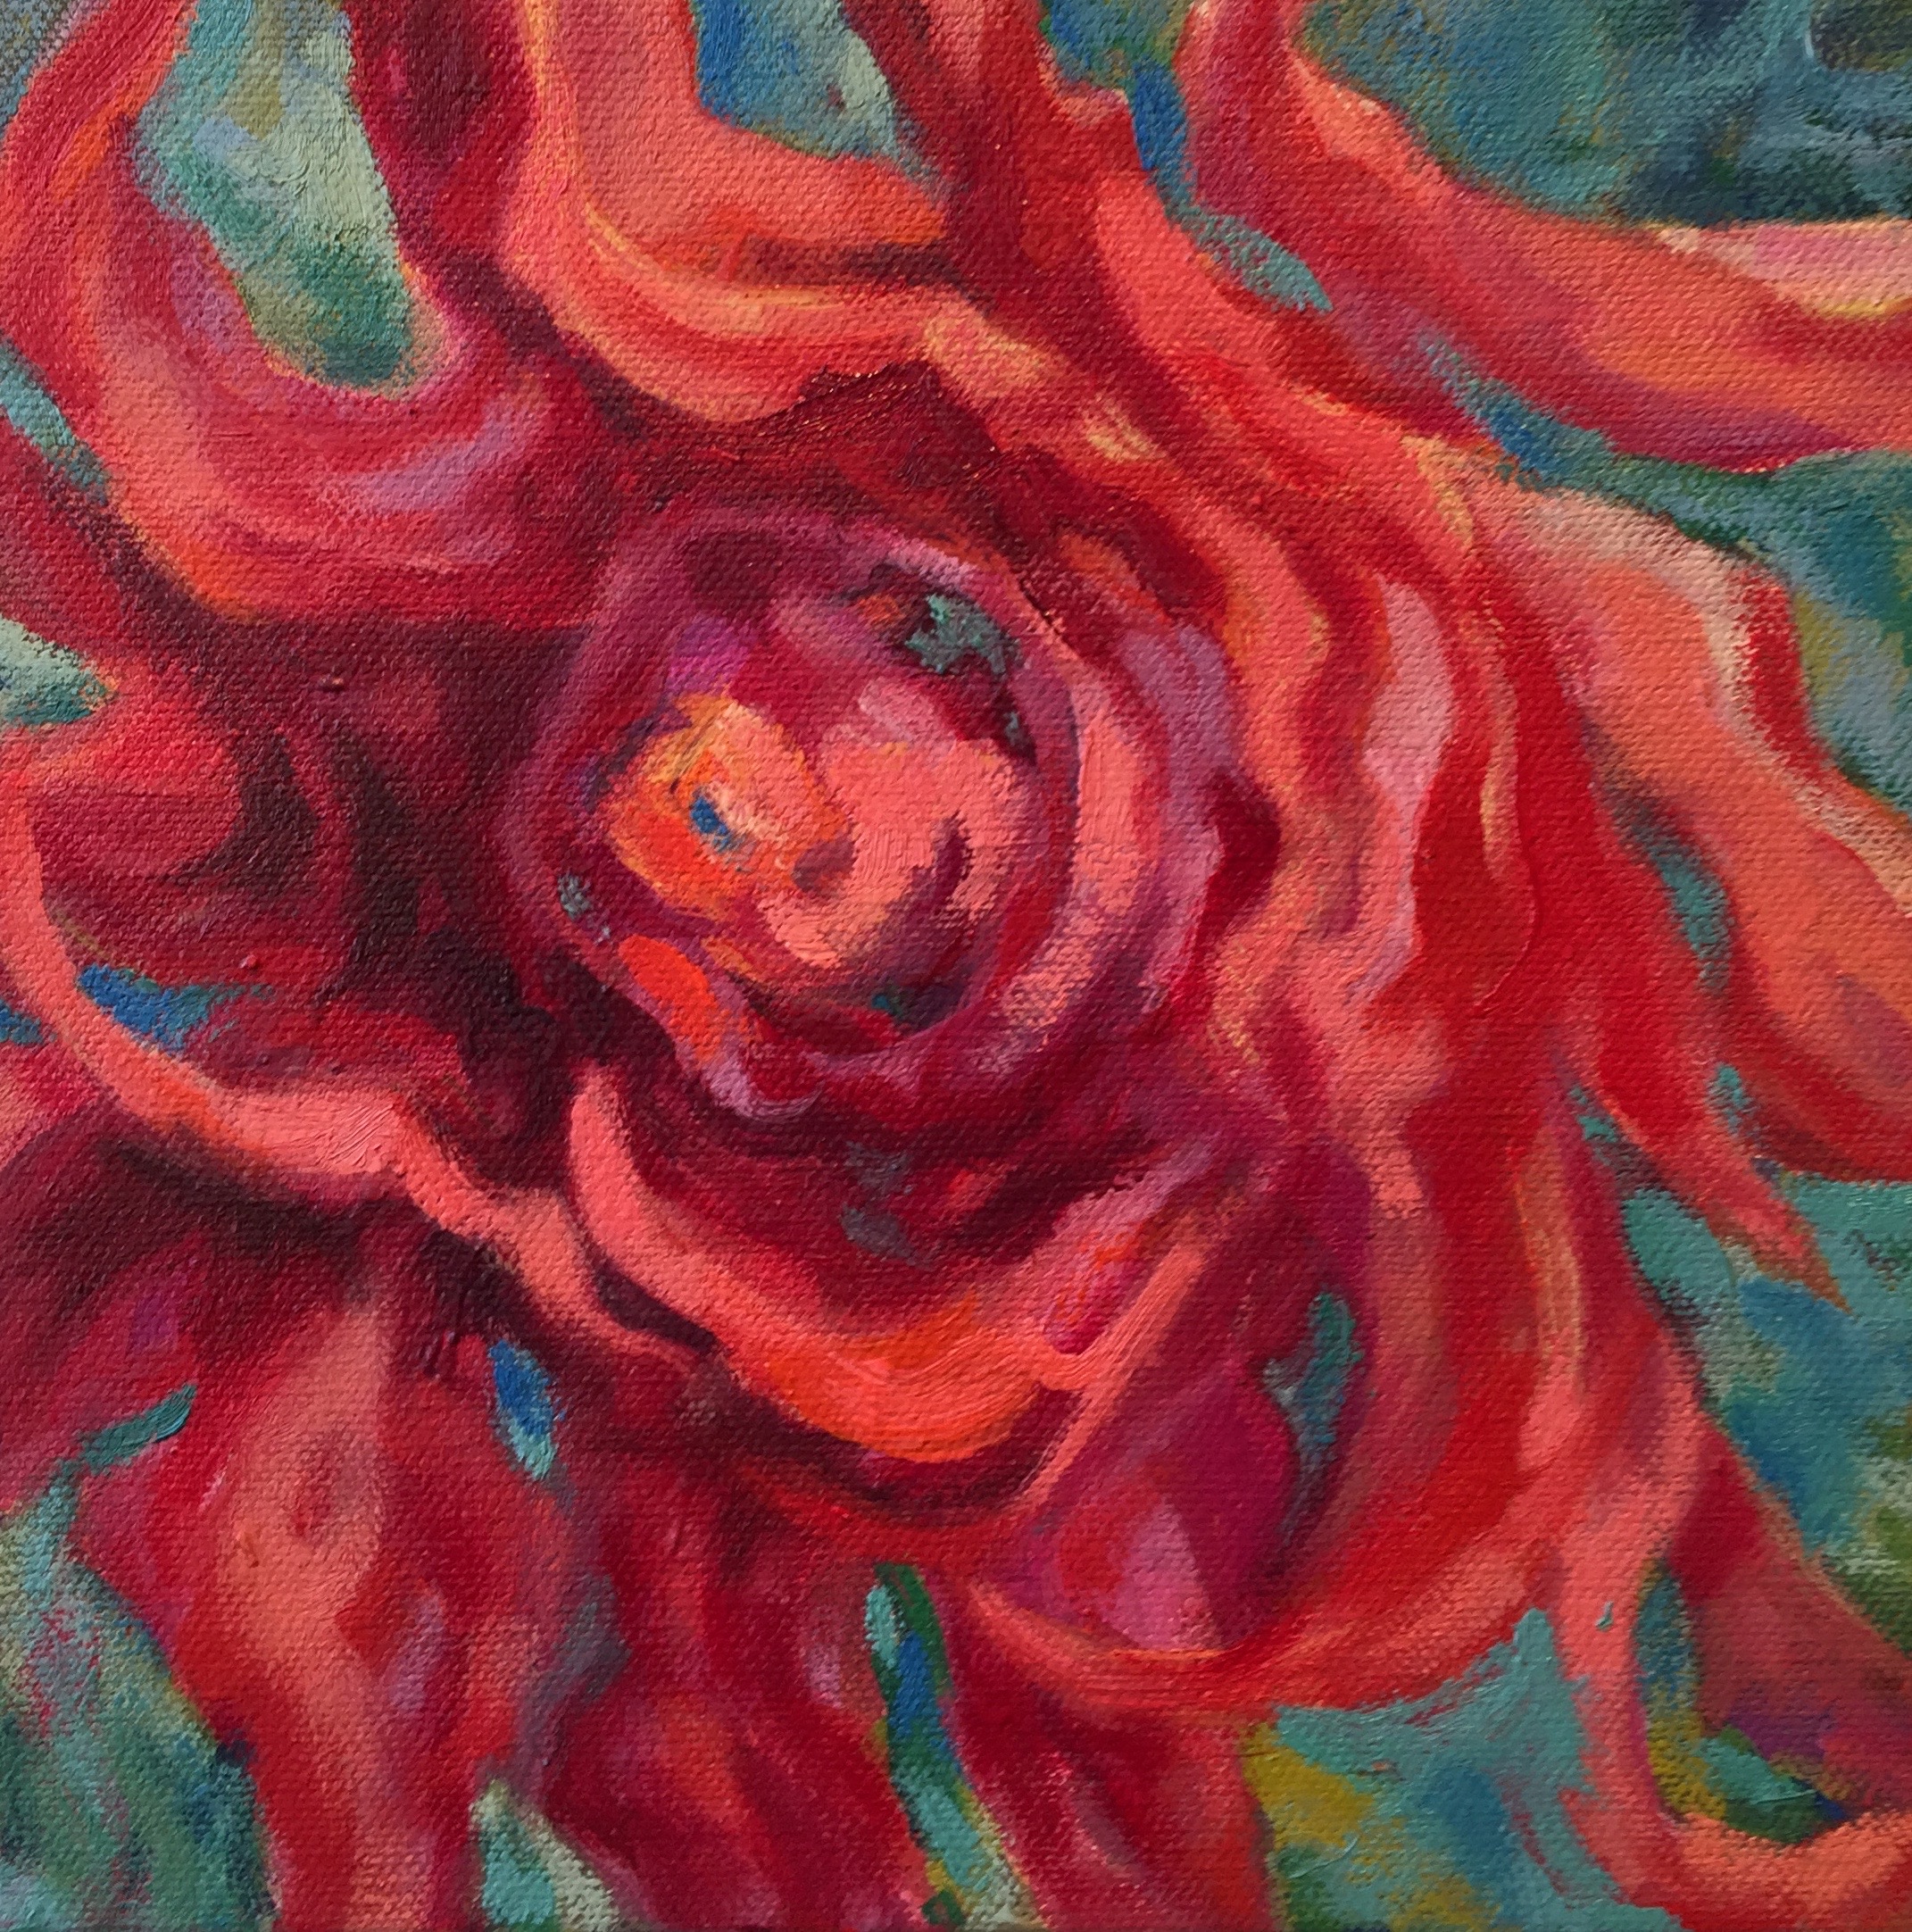 Red Red Rose, oils, 8 x 8